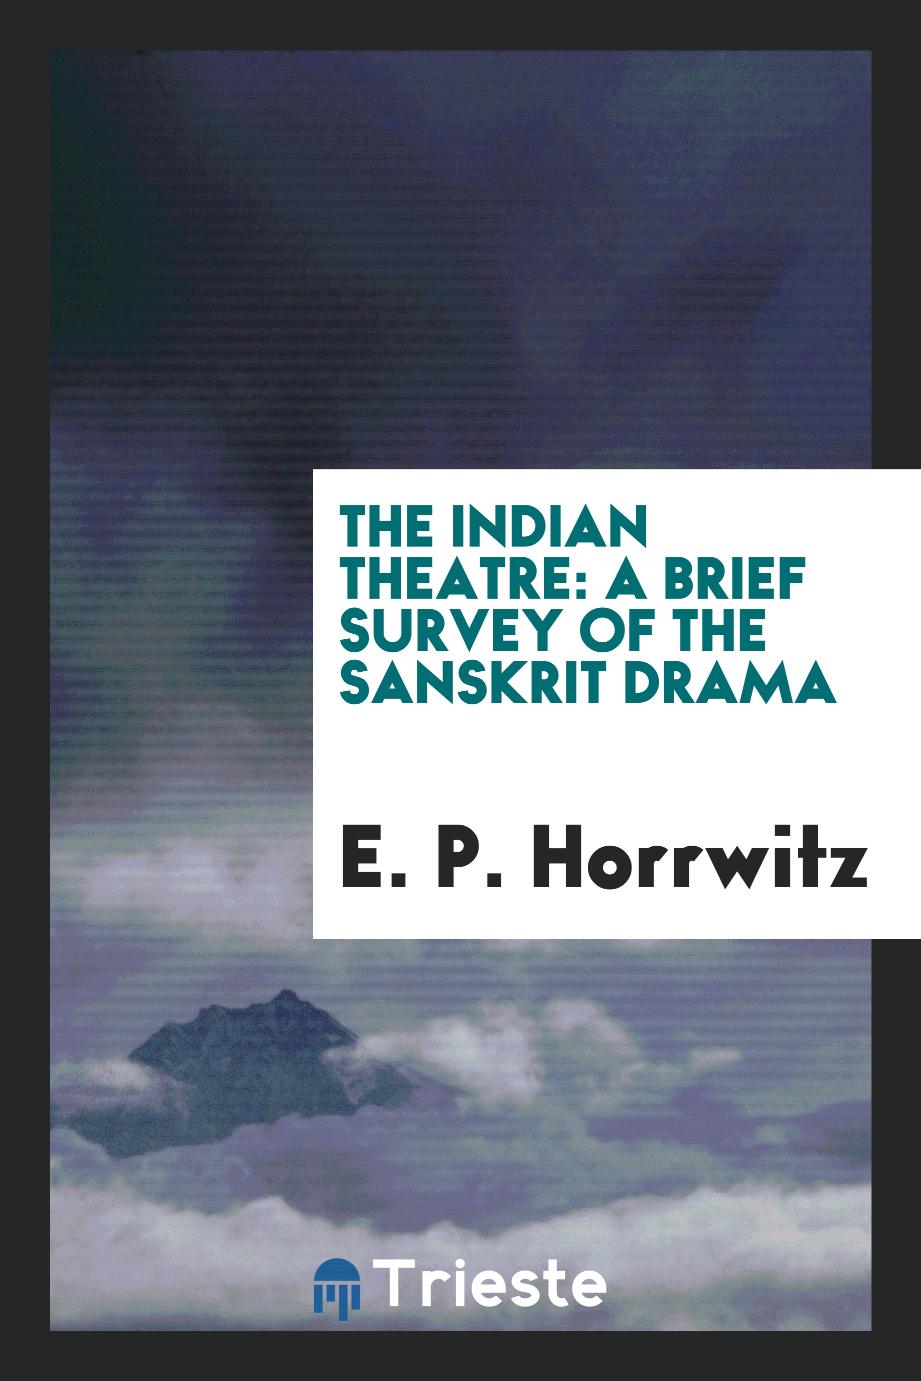 The Indian theatre: a brief survey of the Sanskrit drama